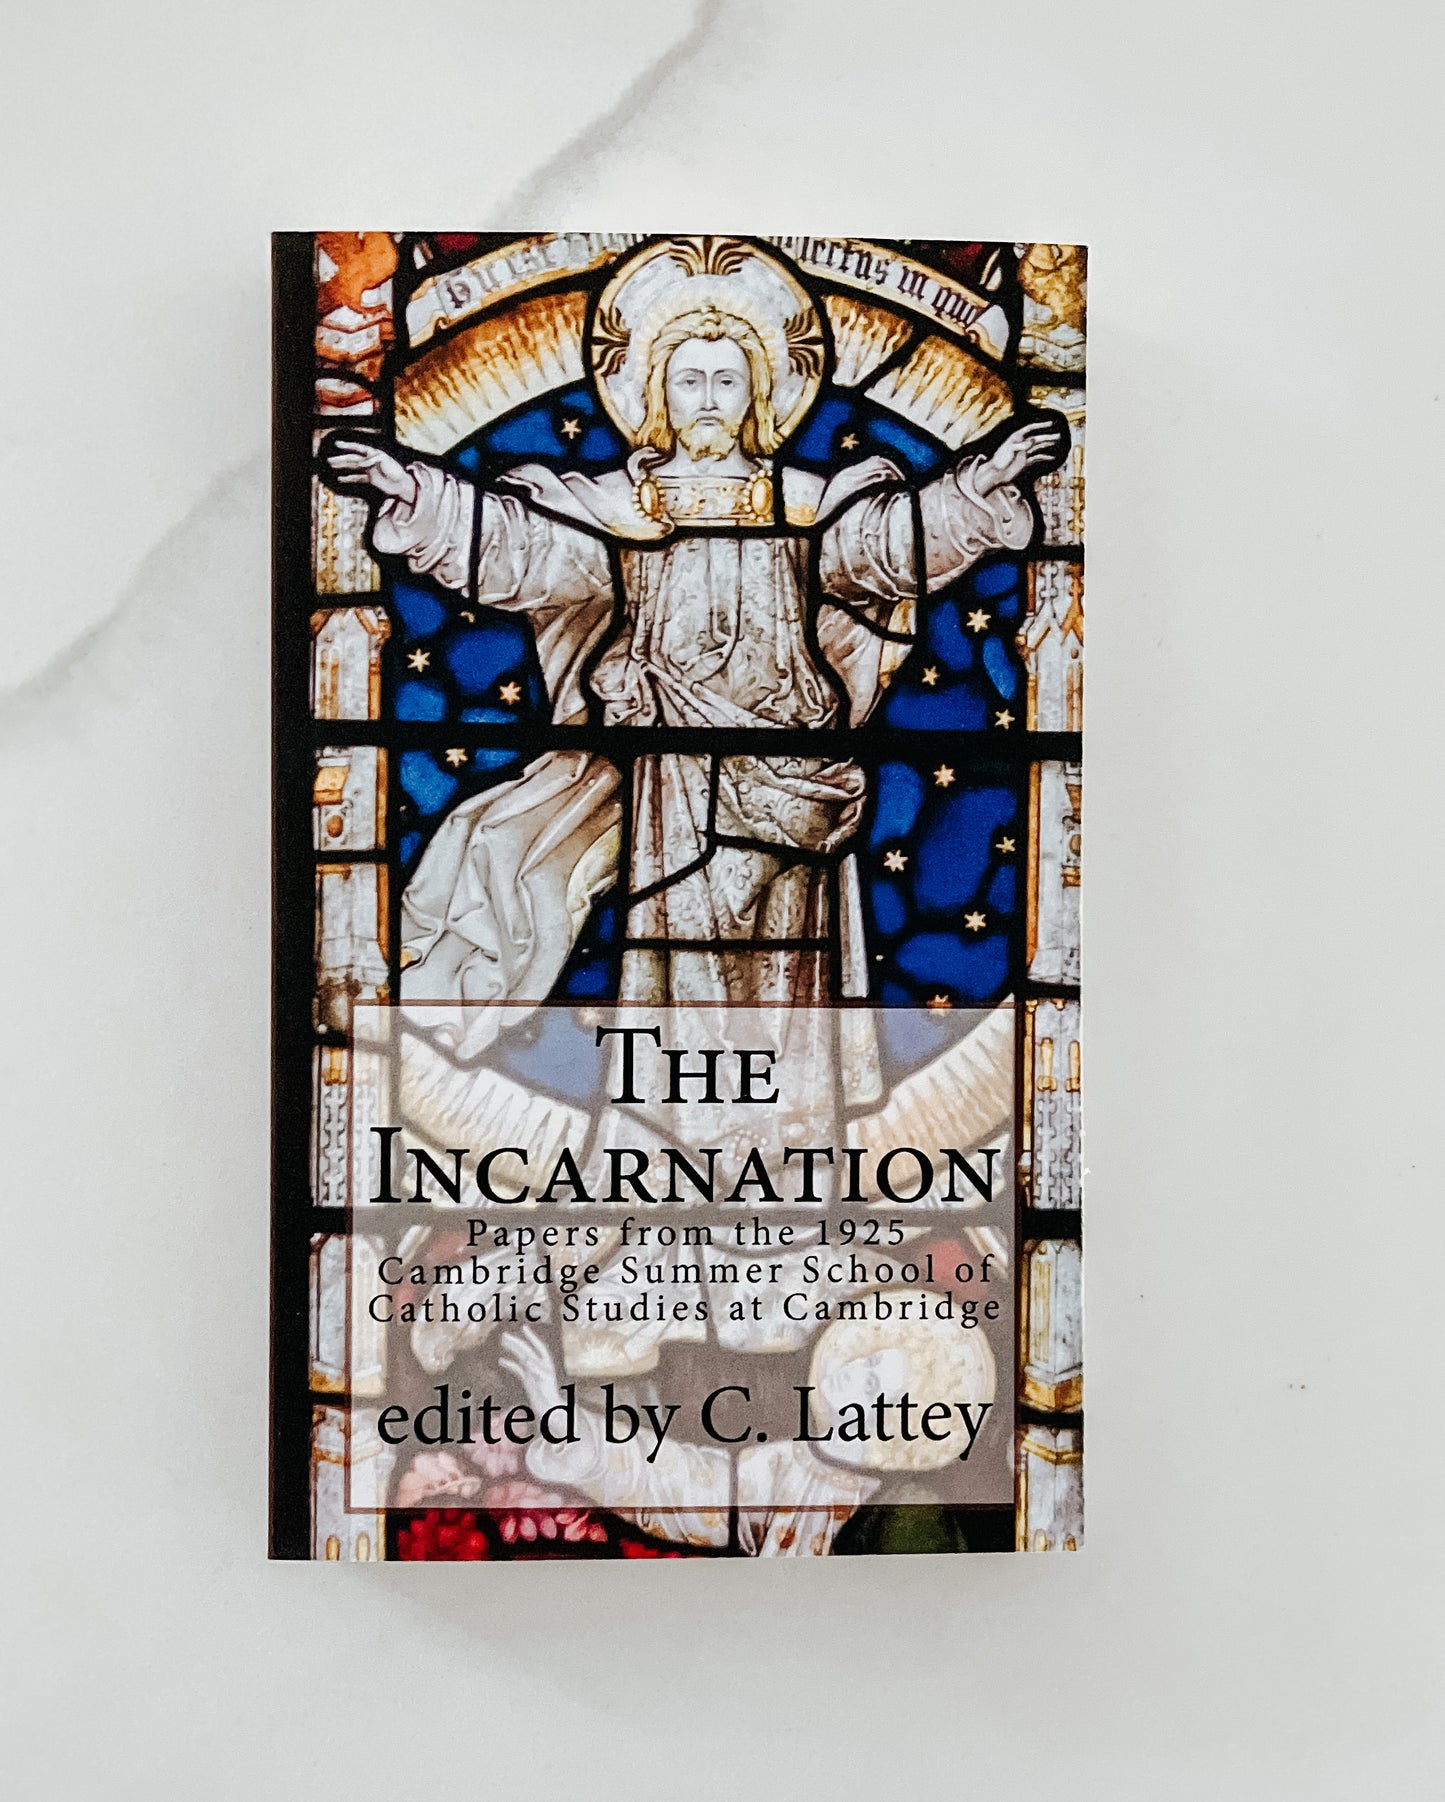 The Incarnation: Papers from the 1925 Summer School of Catholic Studies at Cambridge